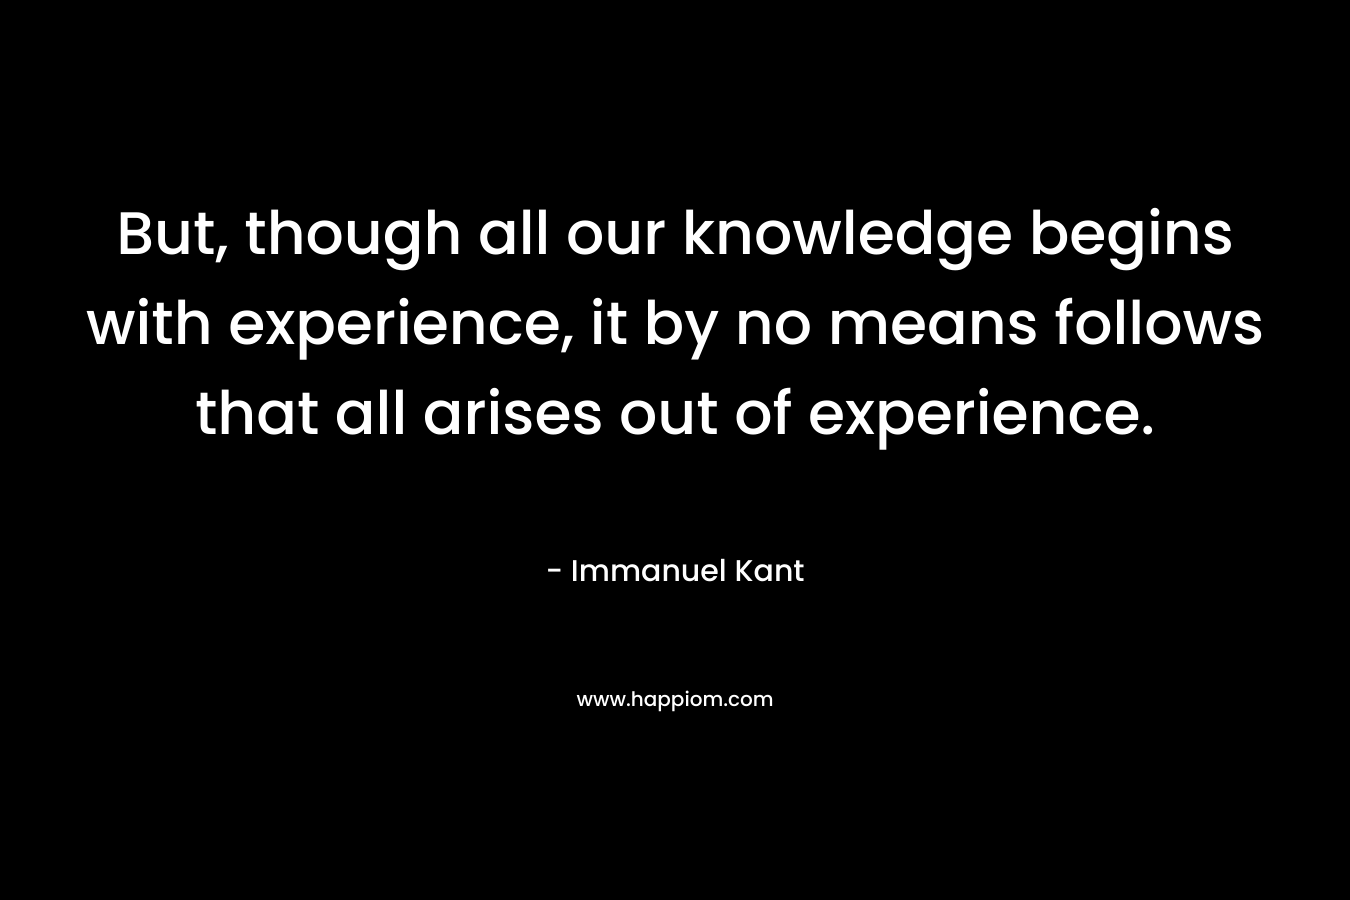 But, though all our knowledge begins with experience, it by no means follows that all arises out of experience. – Immanuel Kant